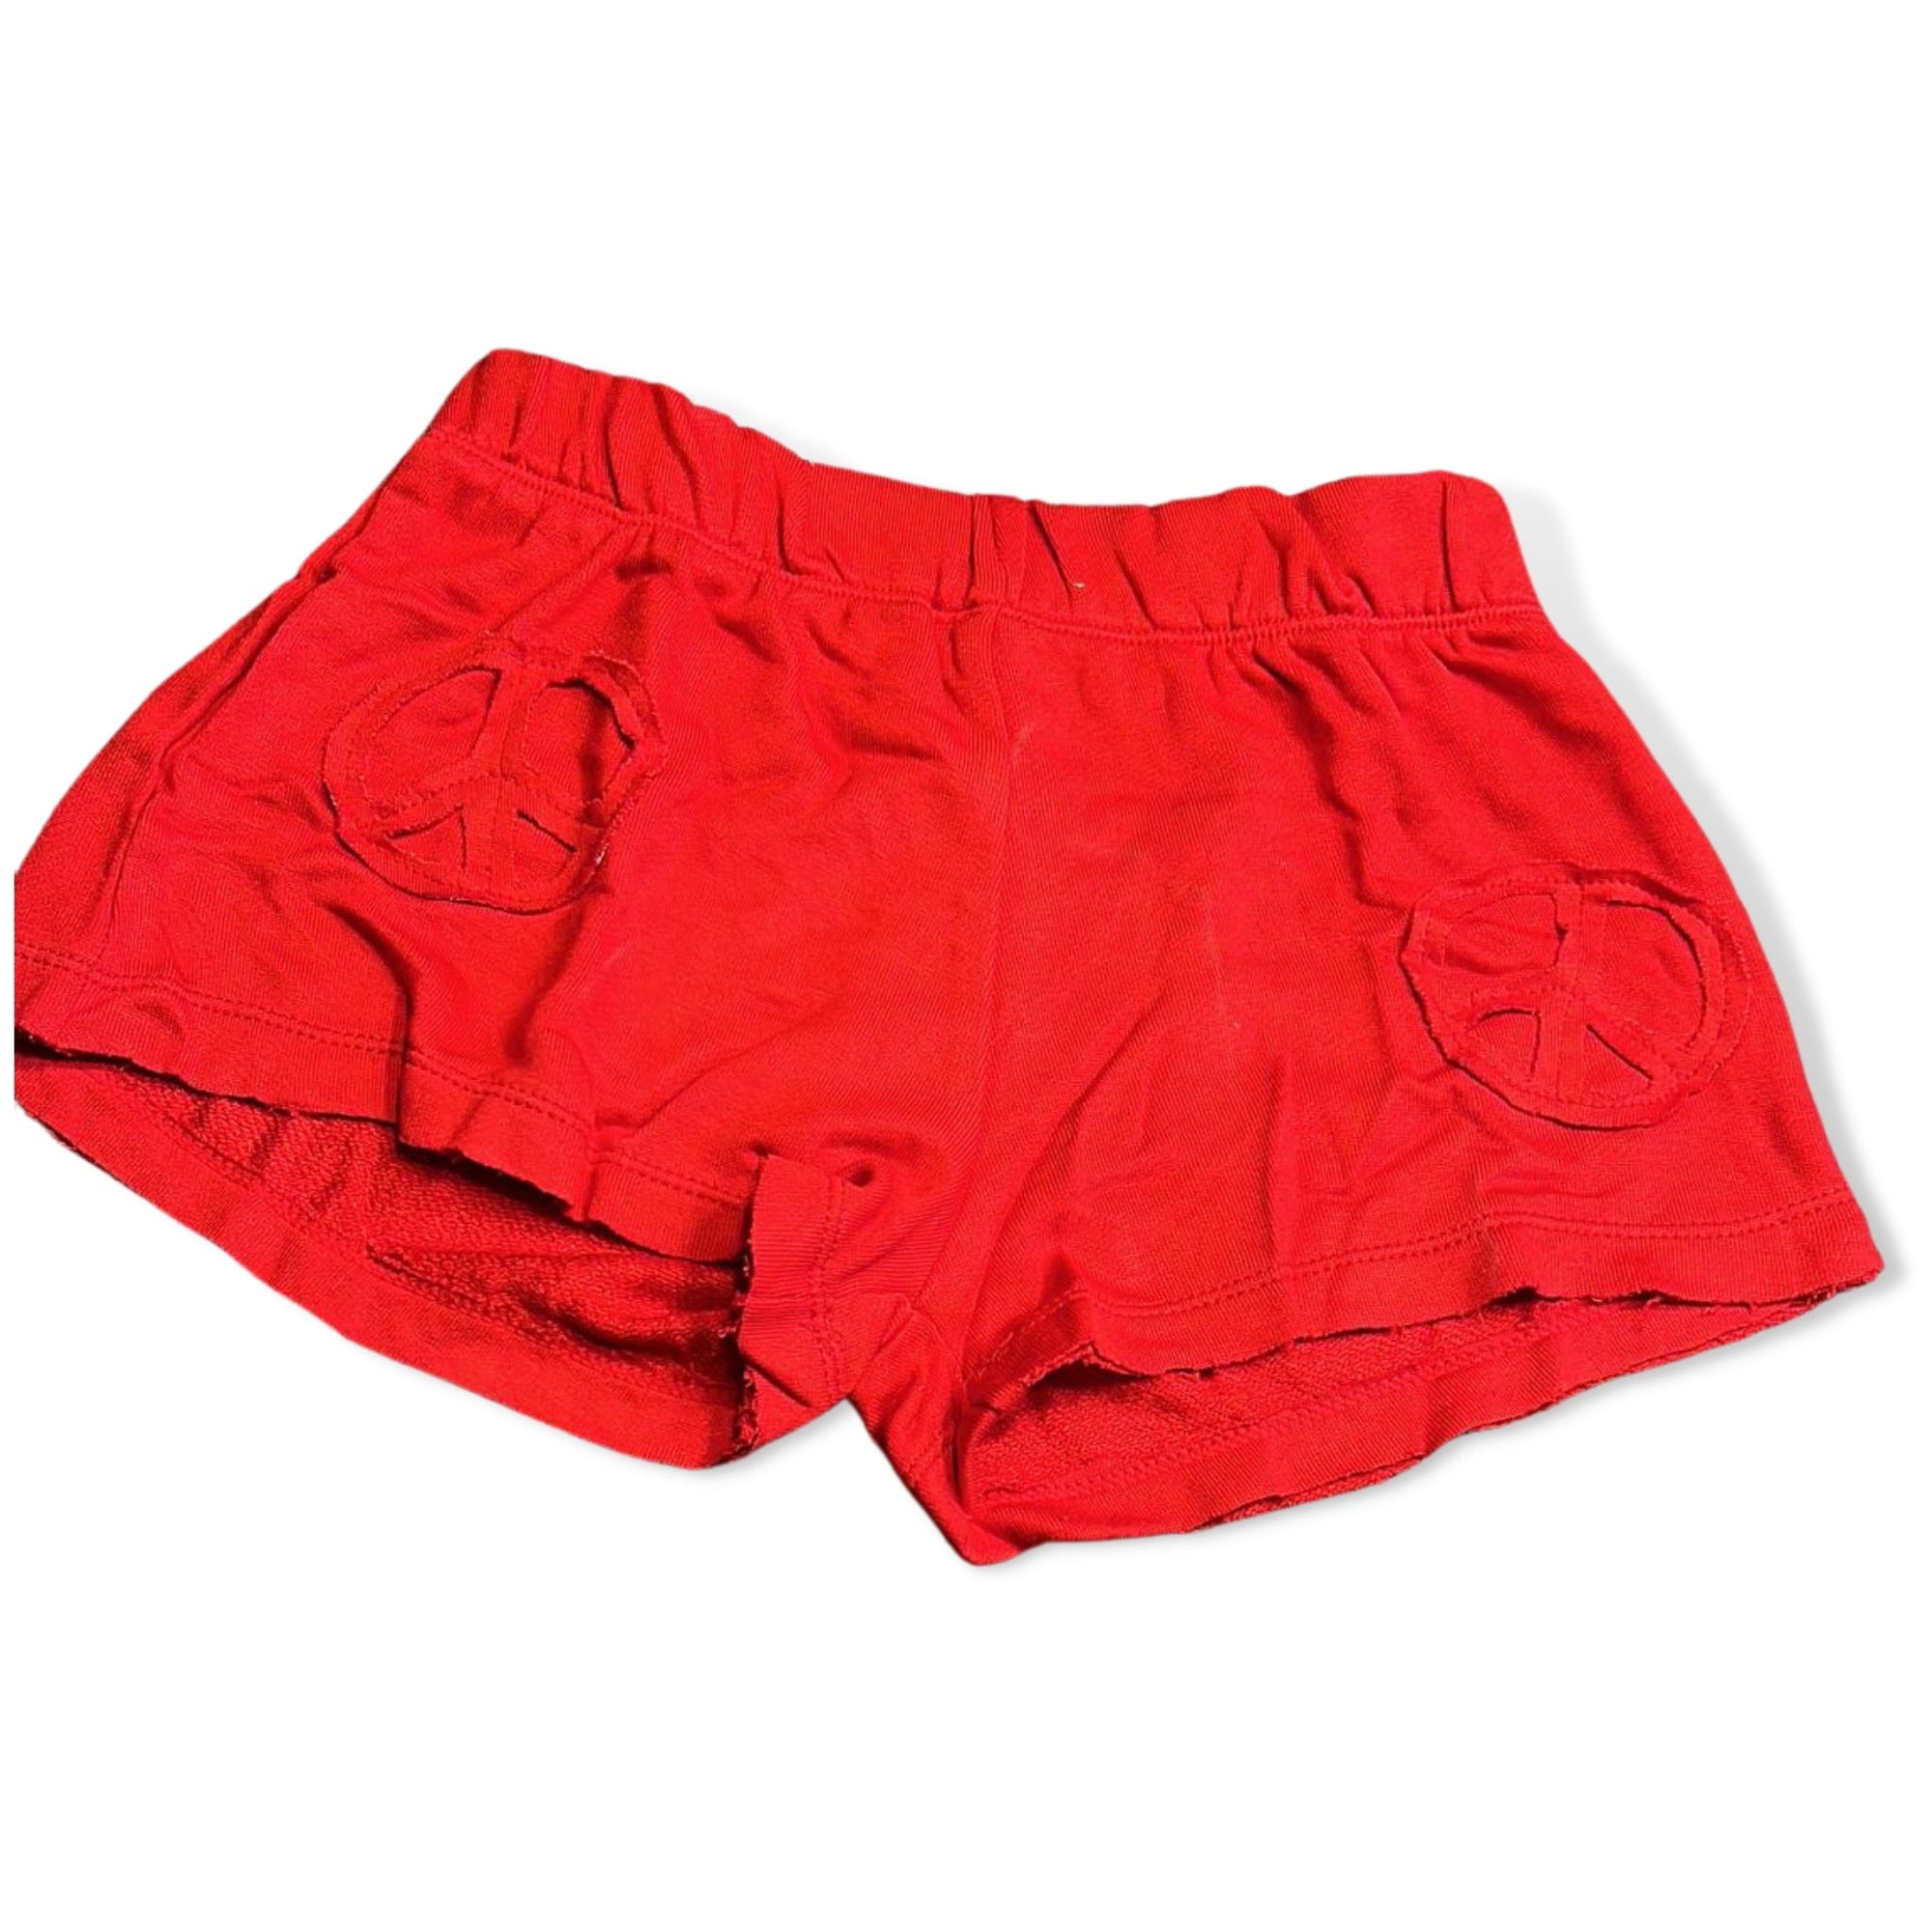 Flowers by Zoe Red Patch Shorts - a Spirit Animal - Shorts $30-$60 $60-$90 4